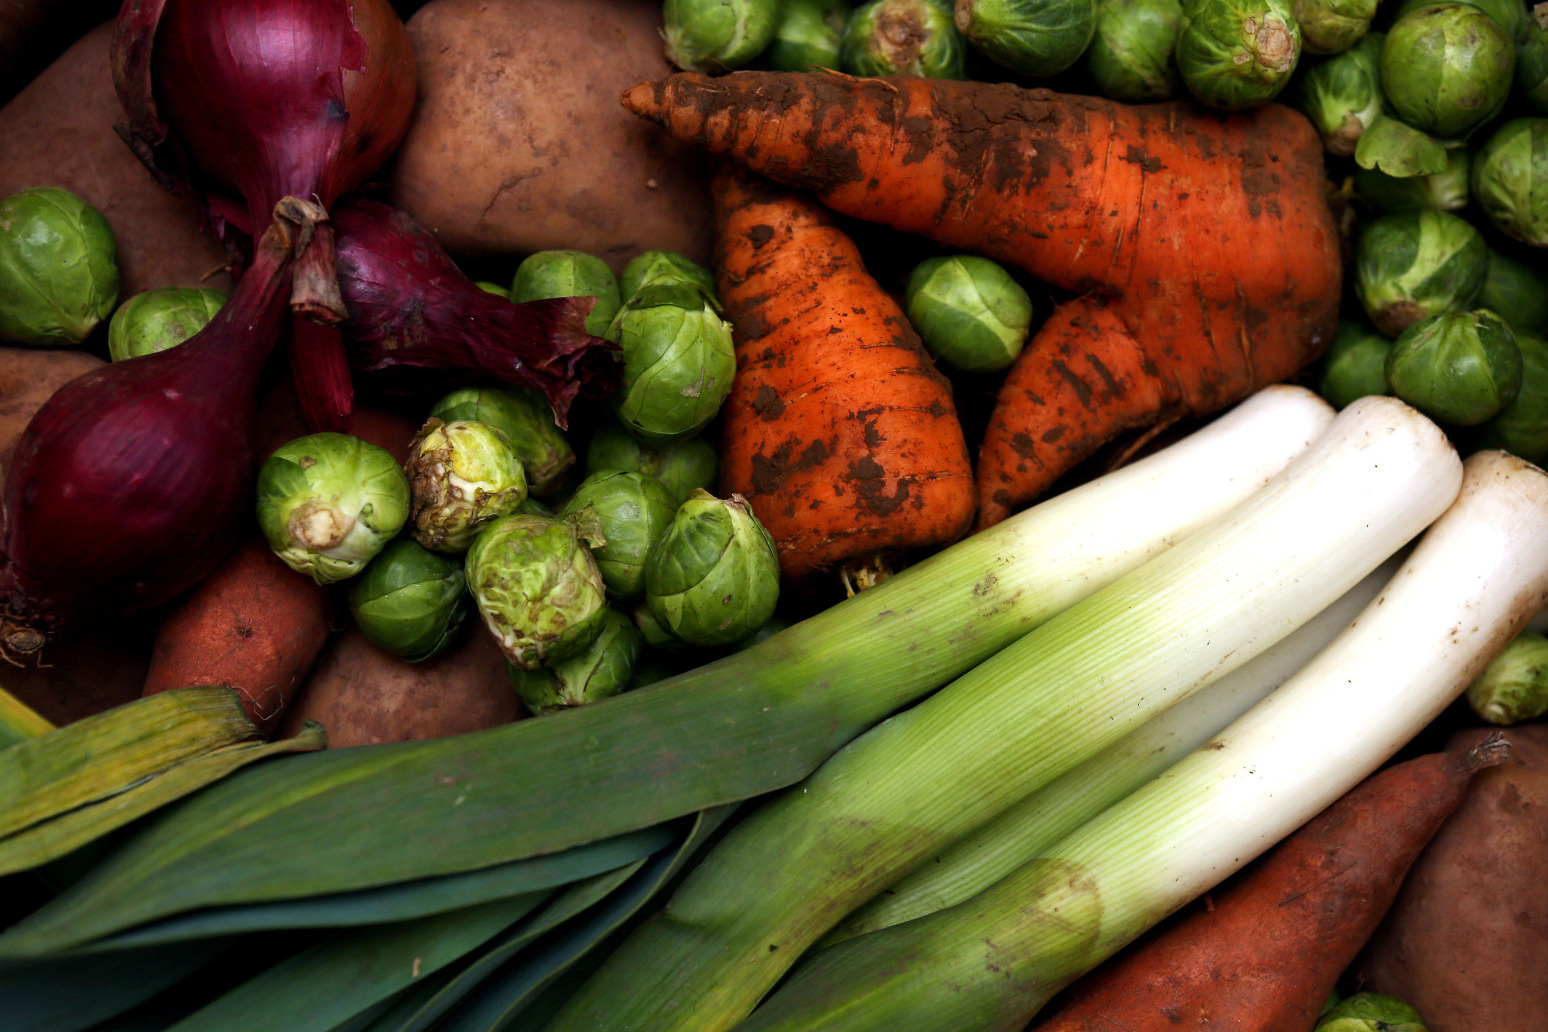 Subsidising fresh fruit and vegetables would increase consumption by up to 15% 